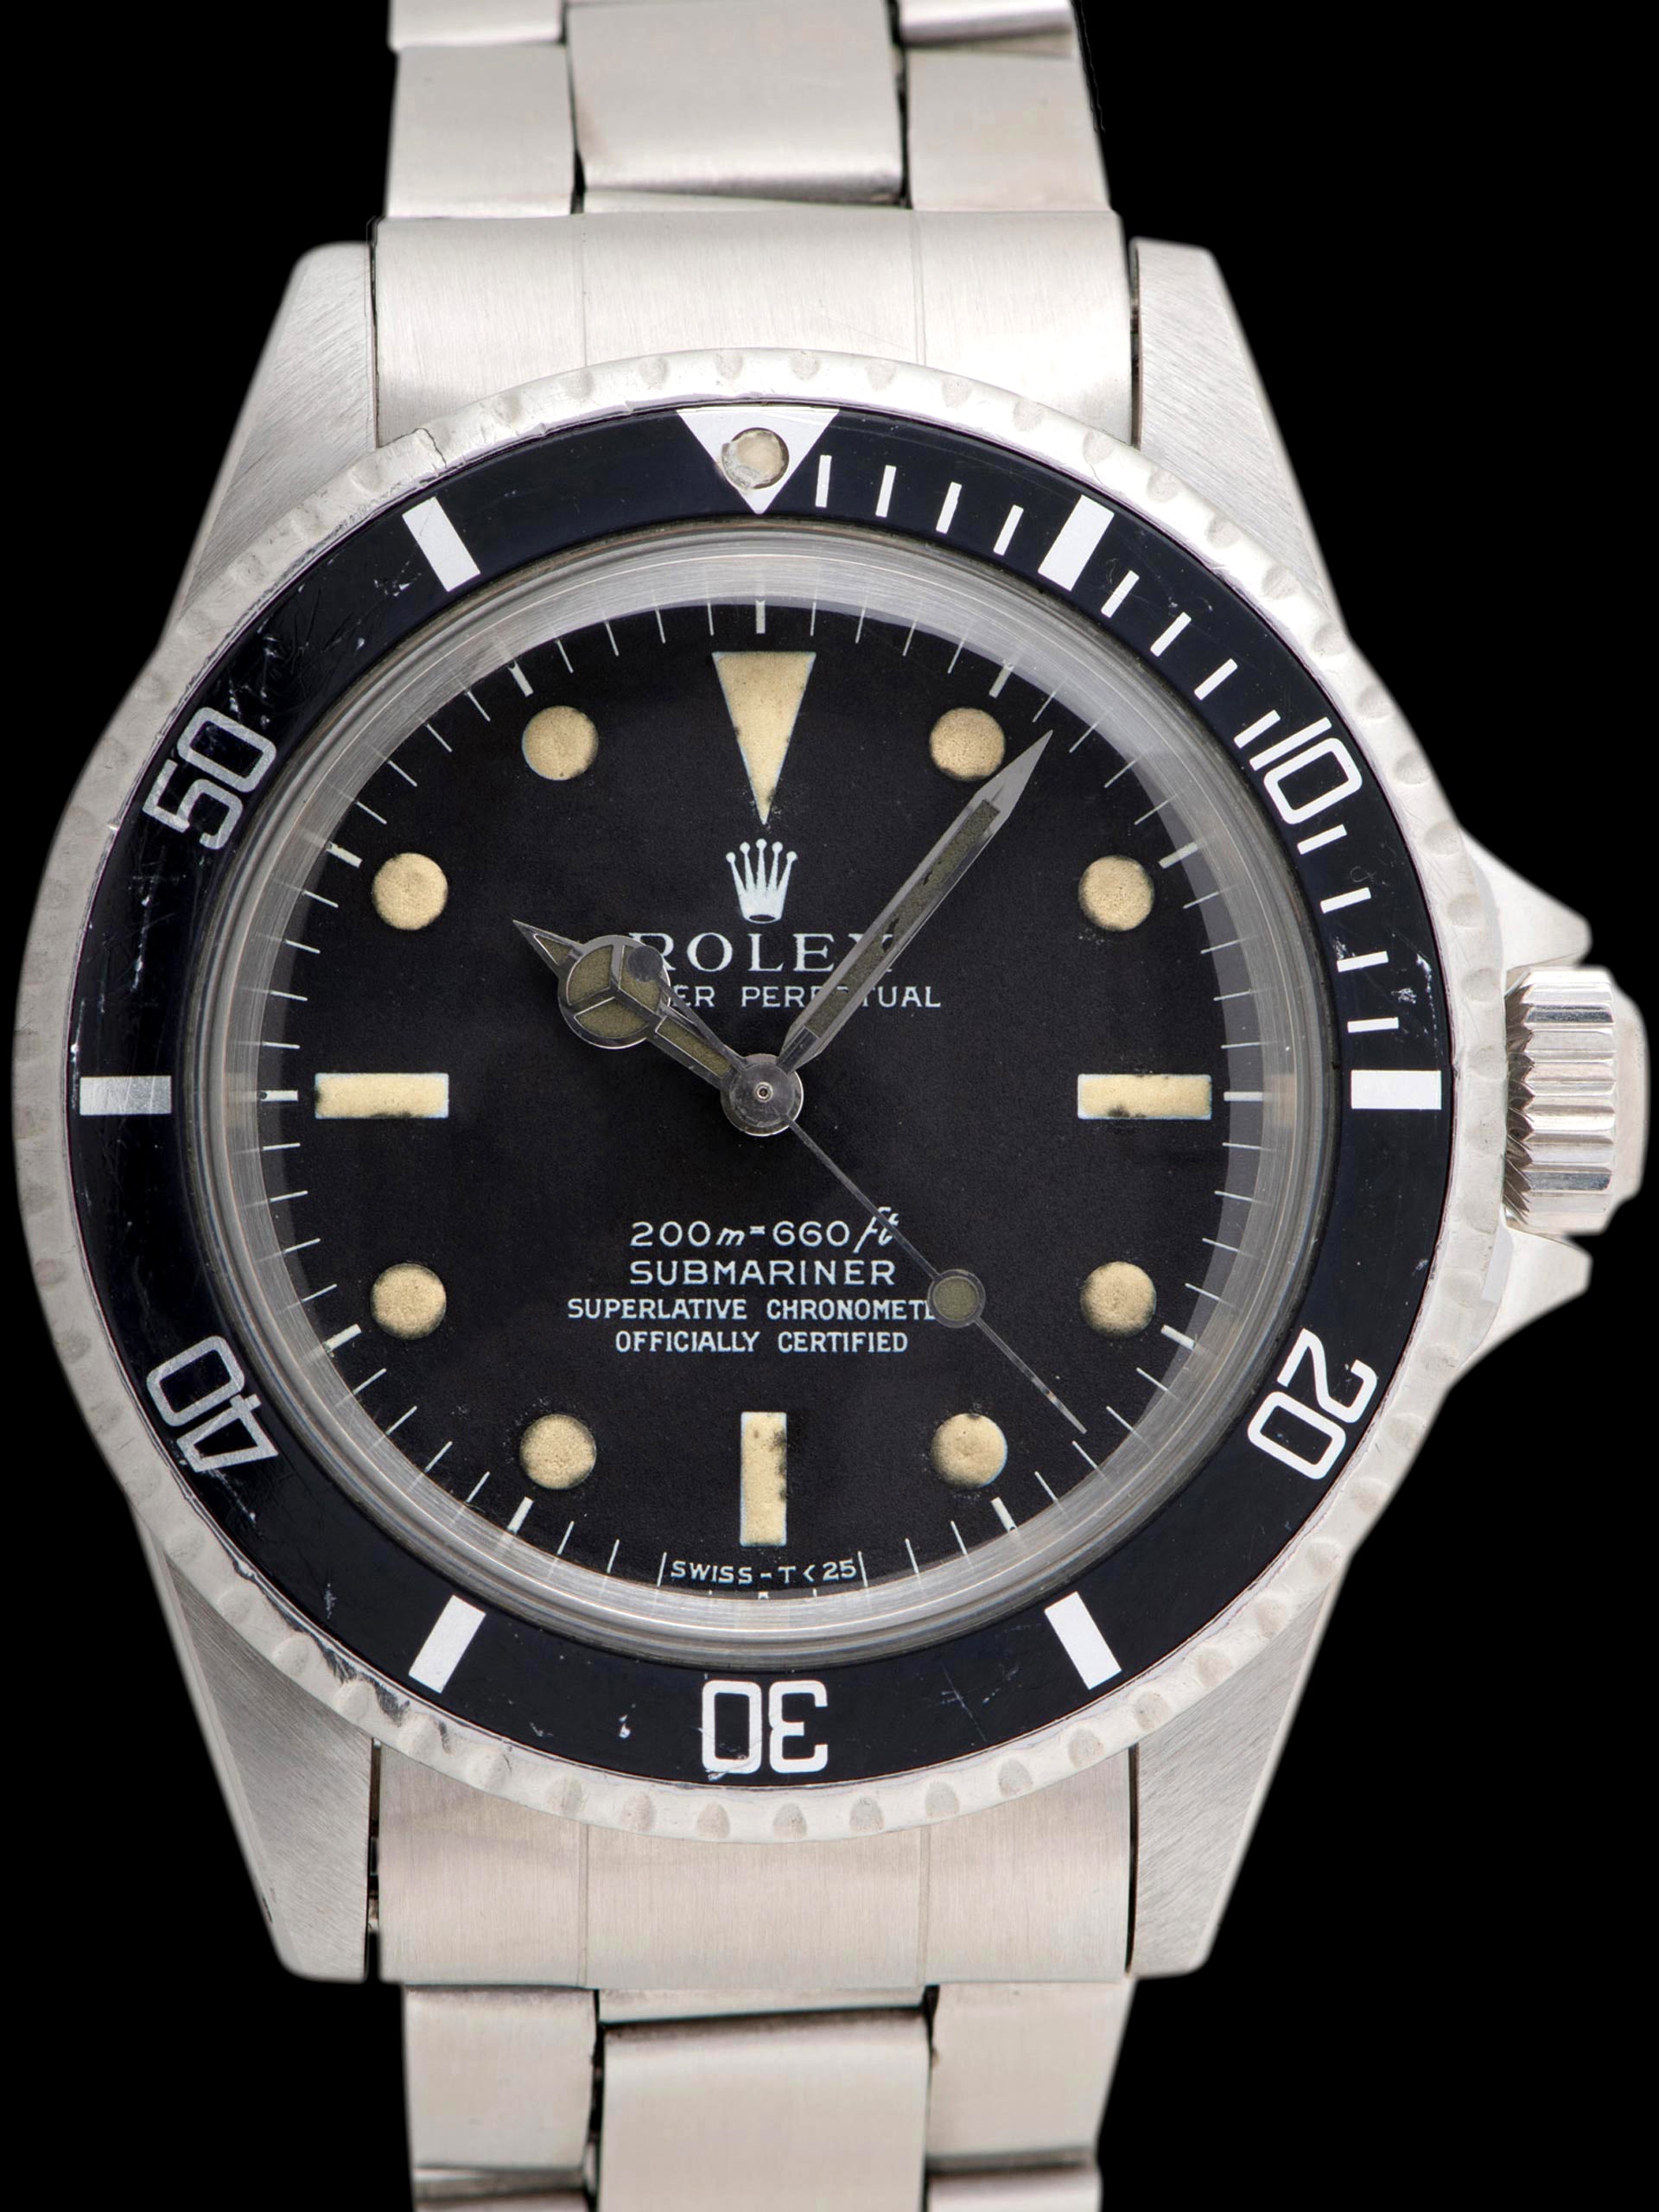 1967 Rolex Submariner (Ref. 5512) "Meters First" W/ Box & Papers